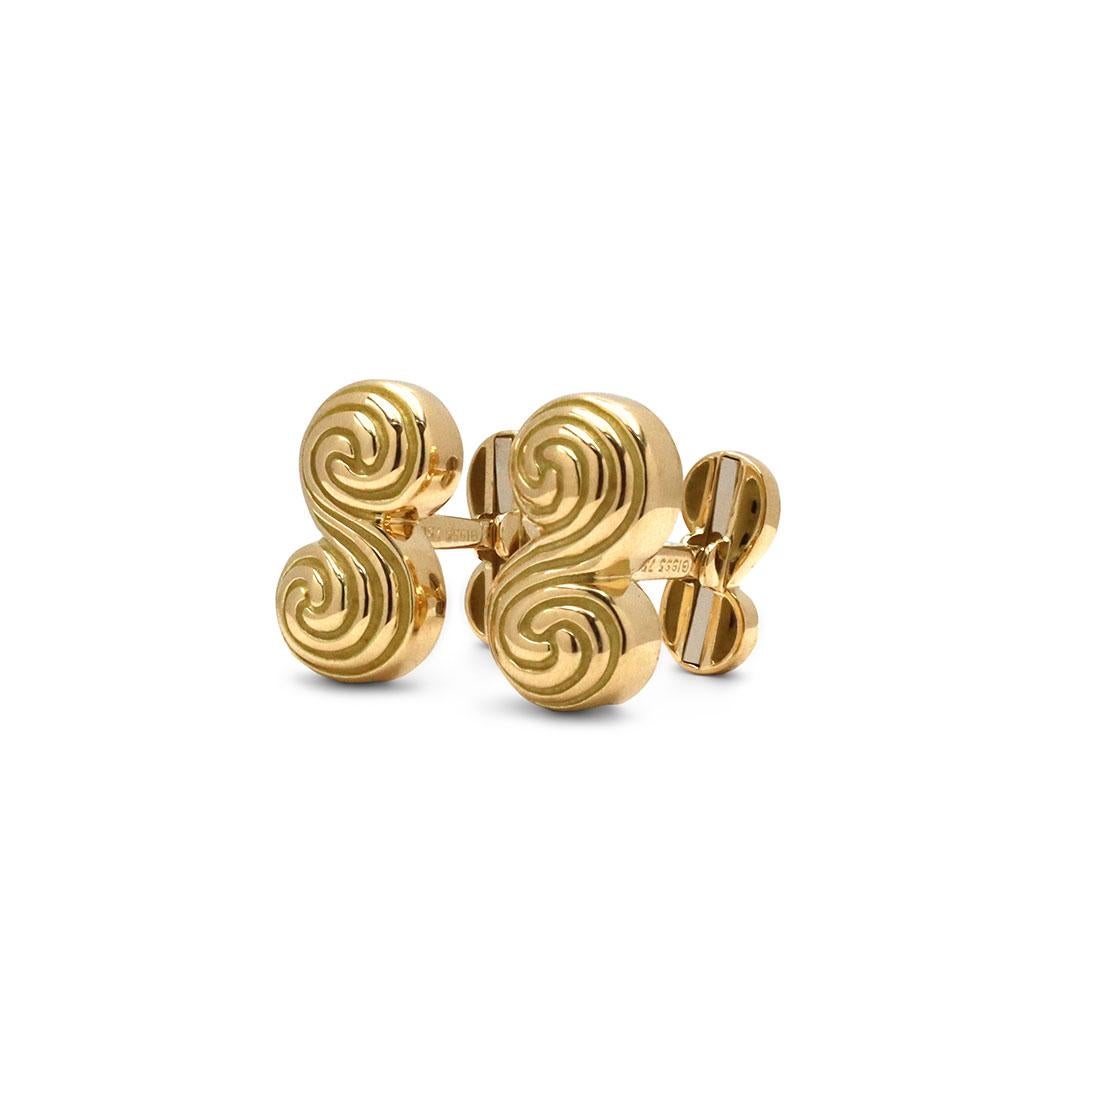 Authentic Tiffany & Co. Spiro Swirl cufflinks crafted in 18 karat yellow gold. These classic cufflinks are designed with deep grooves in the form of the letter S. Signed Tiffany & Co., 750. The cufflinks are presented with Tiffany & Co. pouch, the